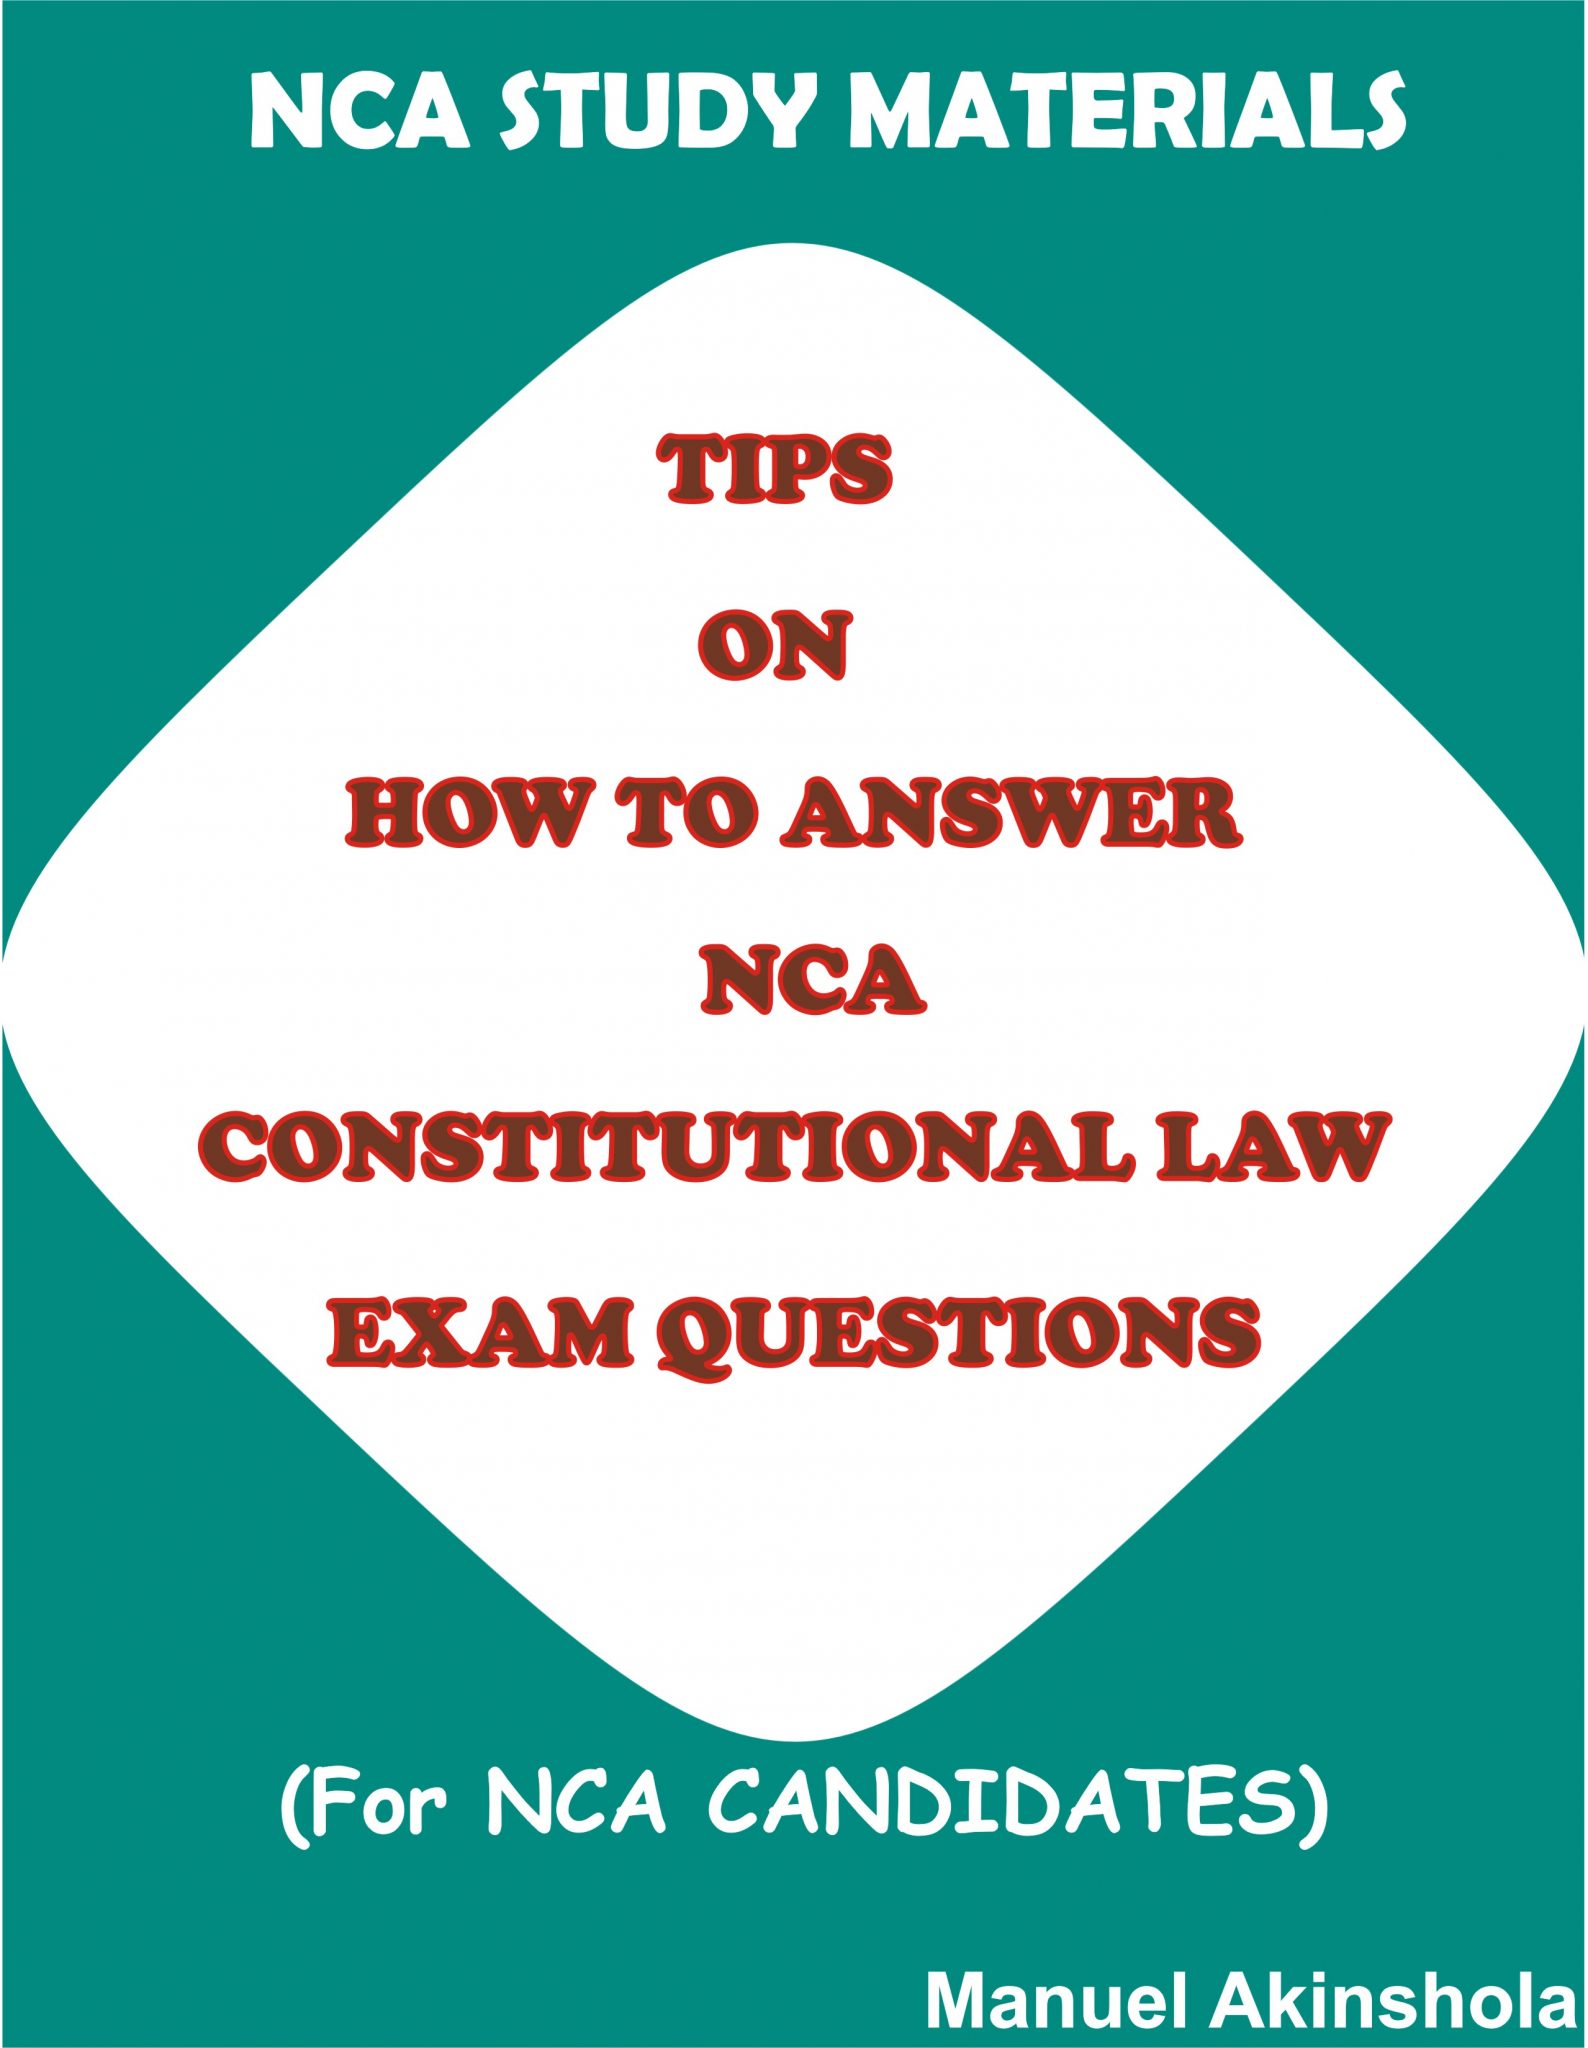 Tips on How to Answer NCA Constitutional Law Exam Questions INTRACI